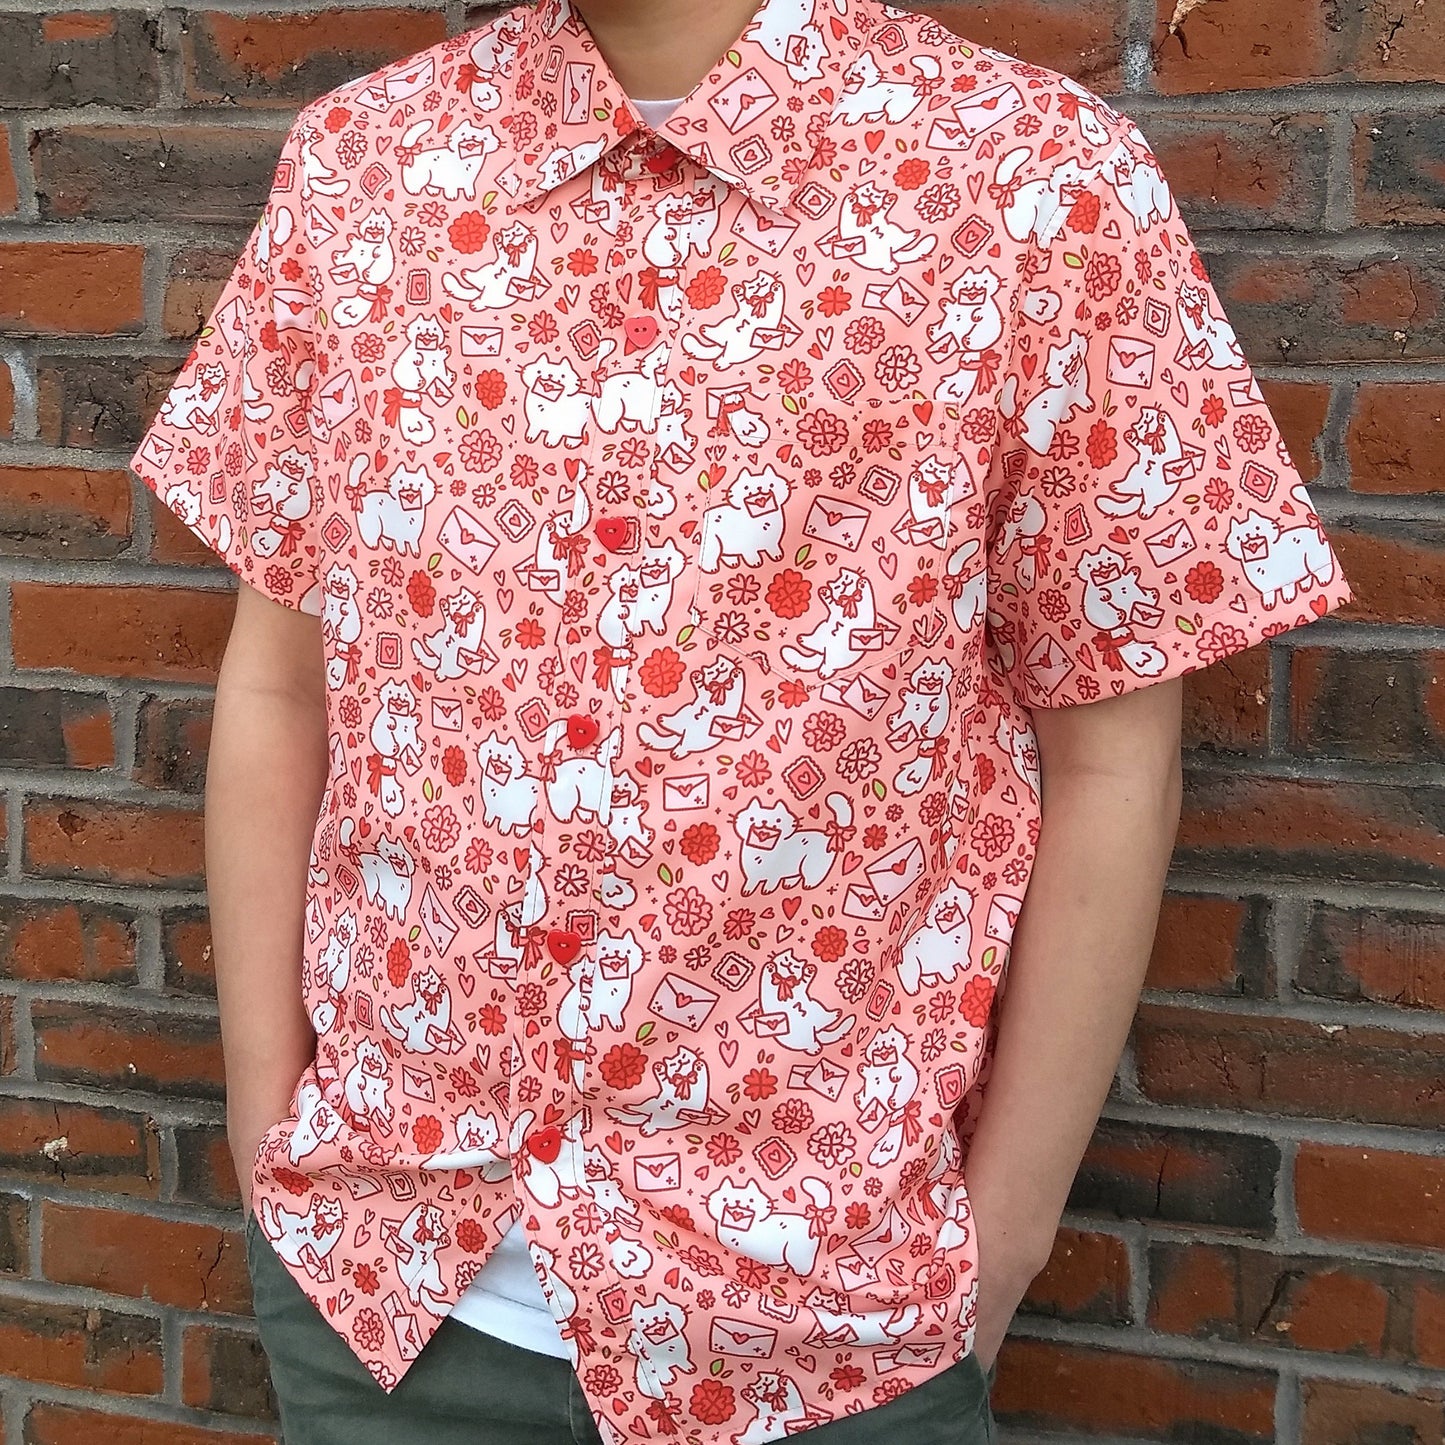 A model stands relaxed wearing the Love Letter Button-up, the bright shirt colors popping against a brick wall in the background.